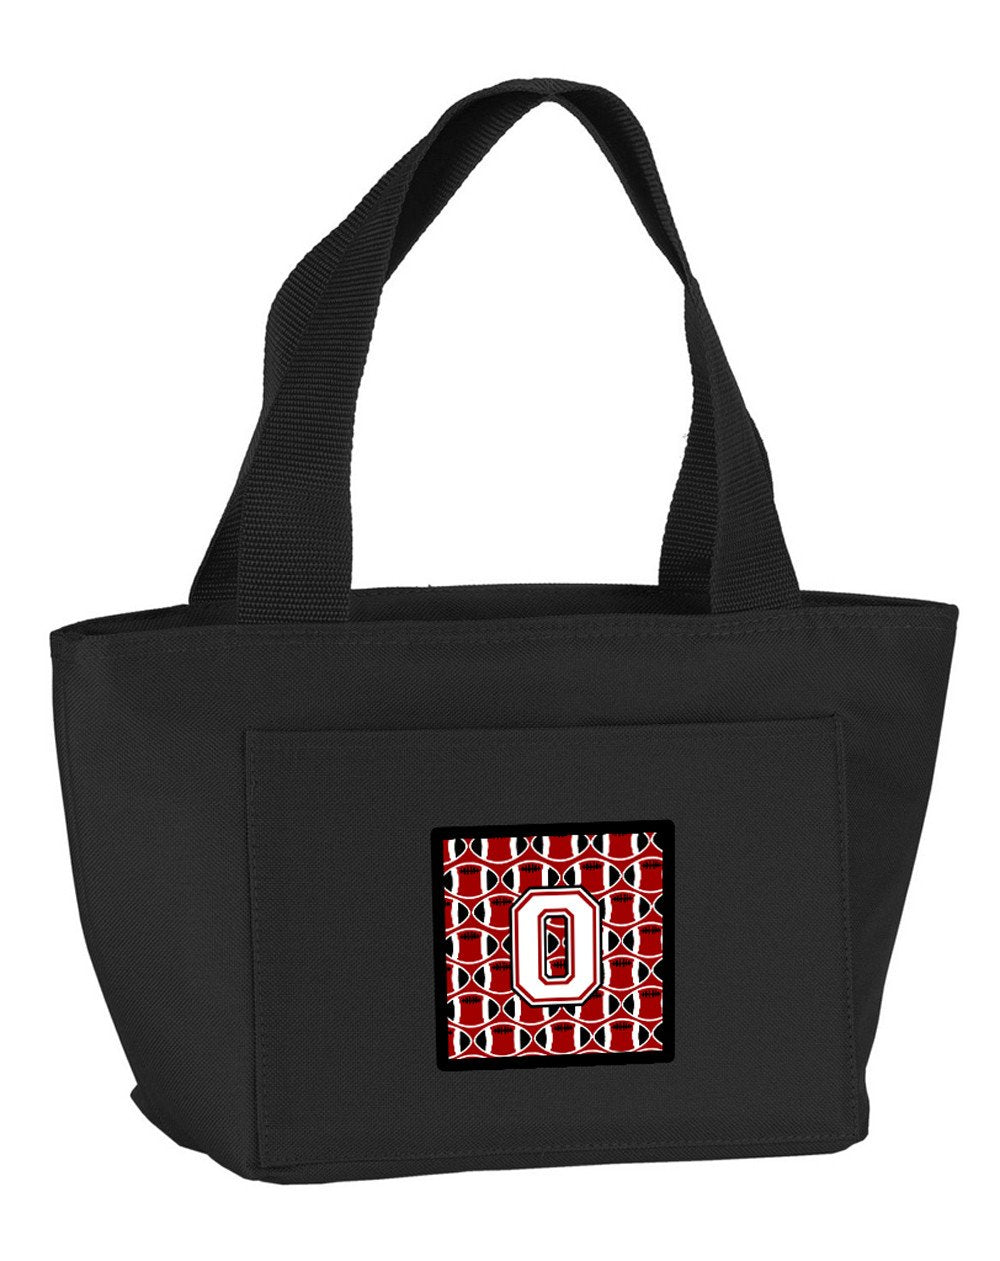 Letter O Football Cardinal and White Lunch Bag CJ1082-OBK-8808 by Caroline's Treasures